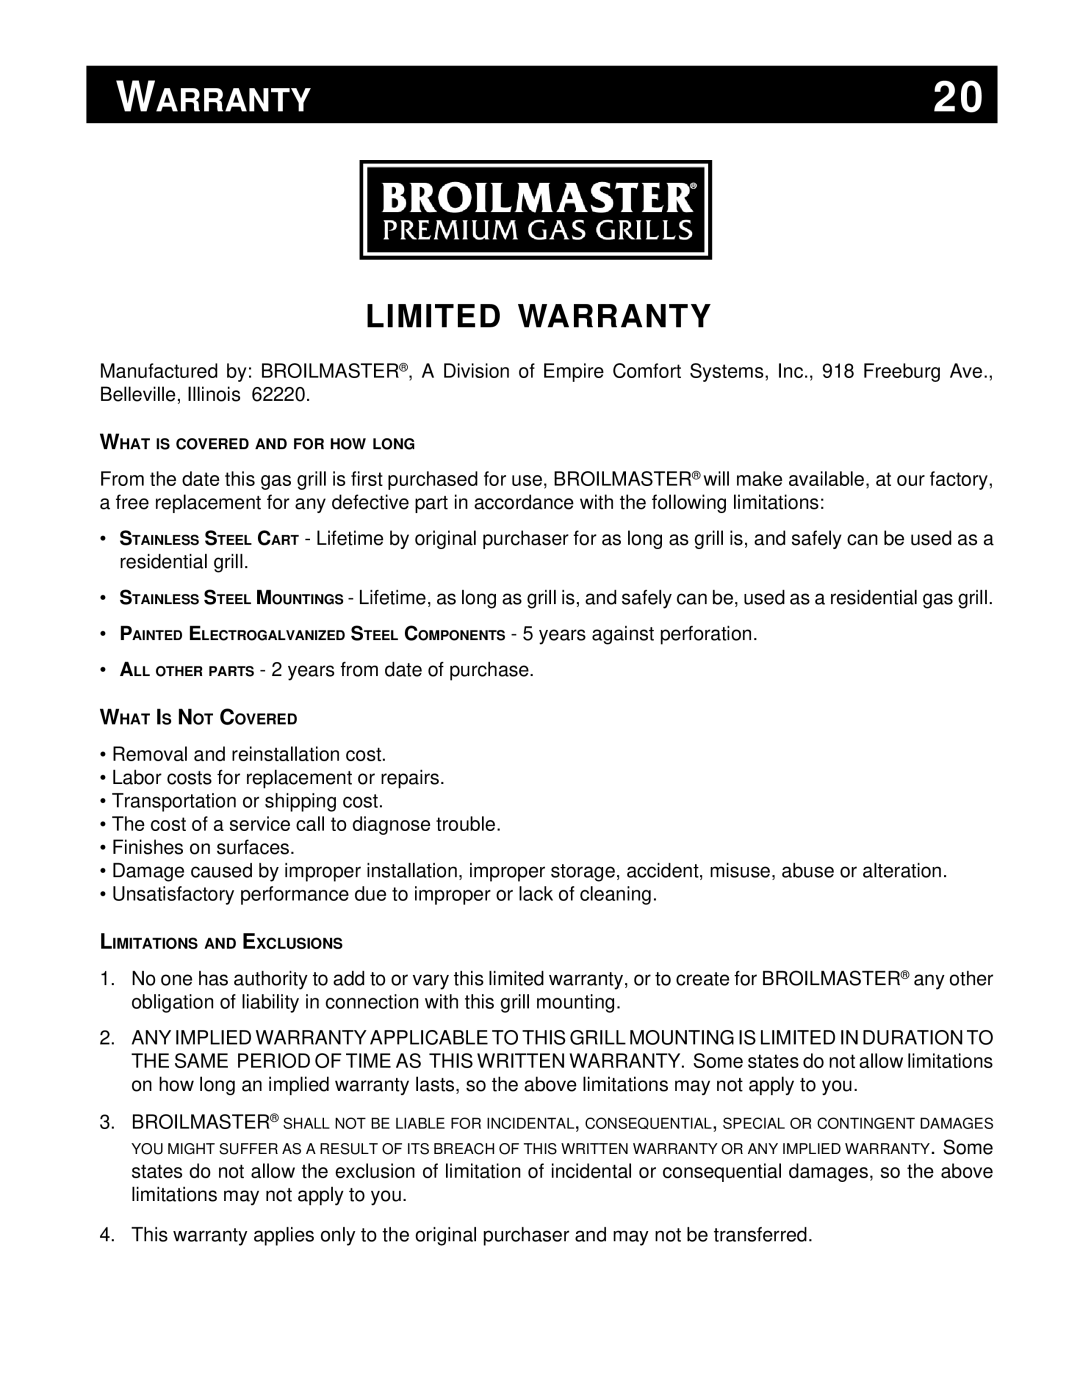 Broilmaster U26SS, DC, U48, PB, PC, AND P48 owner manual Limited Warranty 